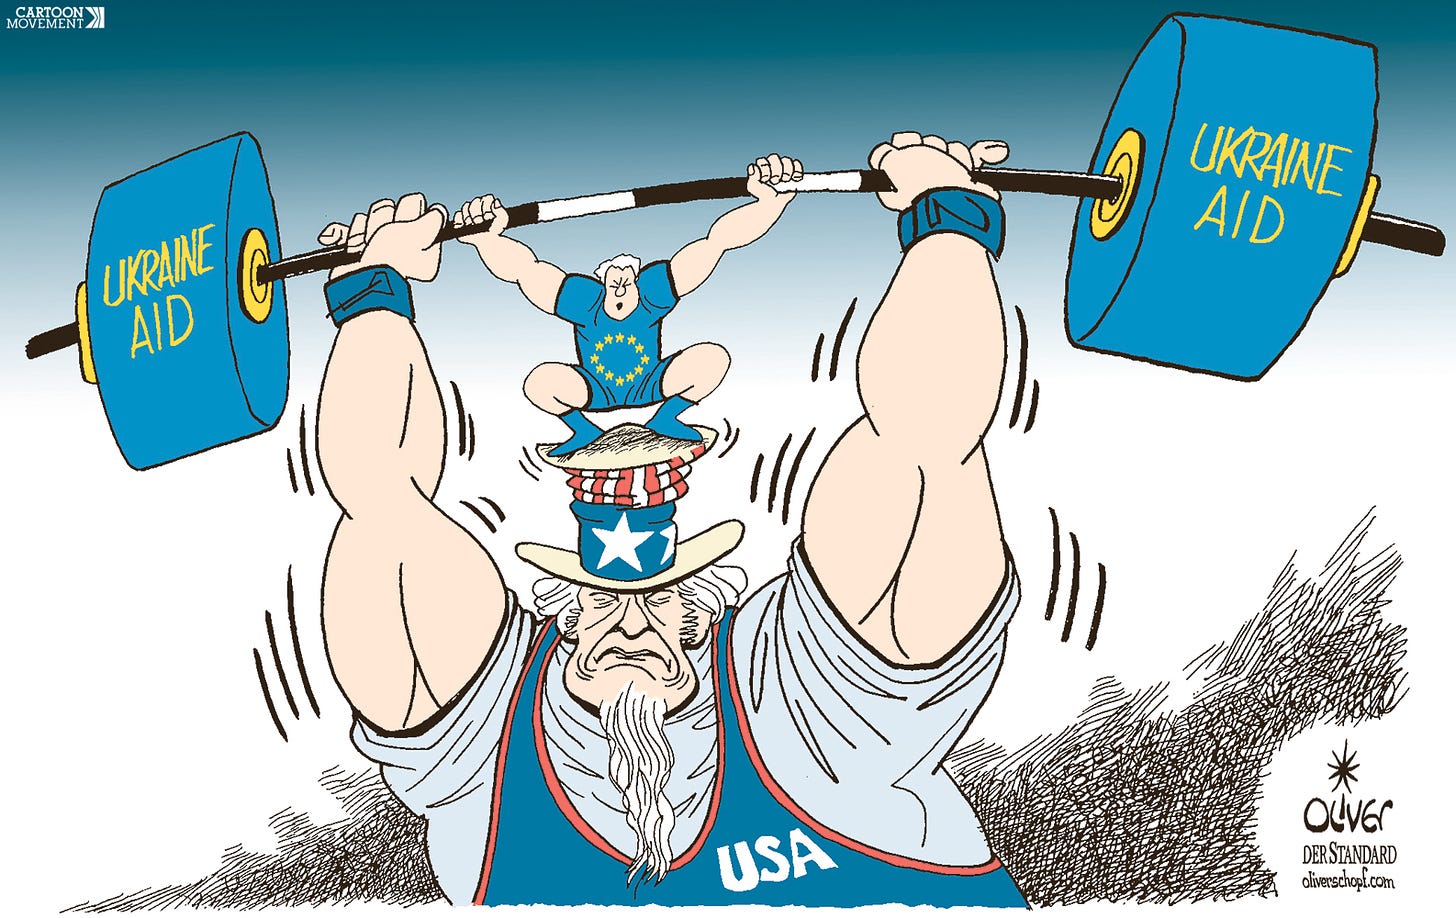 Cartoon showing Uncle Sam as a weight lifter. The weights are labeled "Ukraine aid". On top of Uncle Sams head there stands a tiny figure wearing a shirt with the EU flag, who is helping to lift the enormous weights.